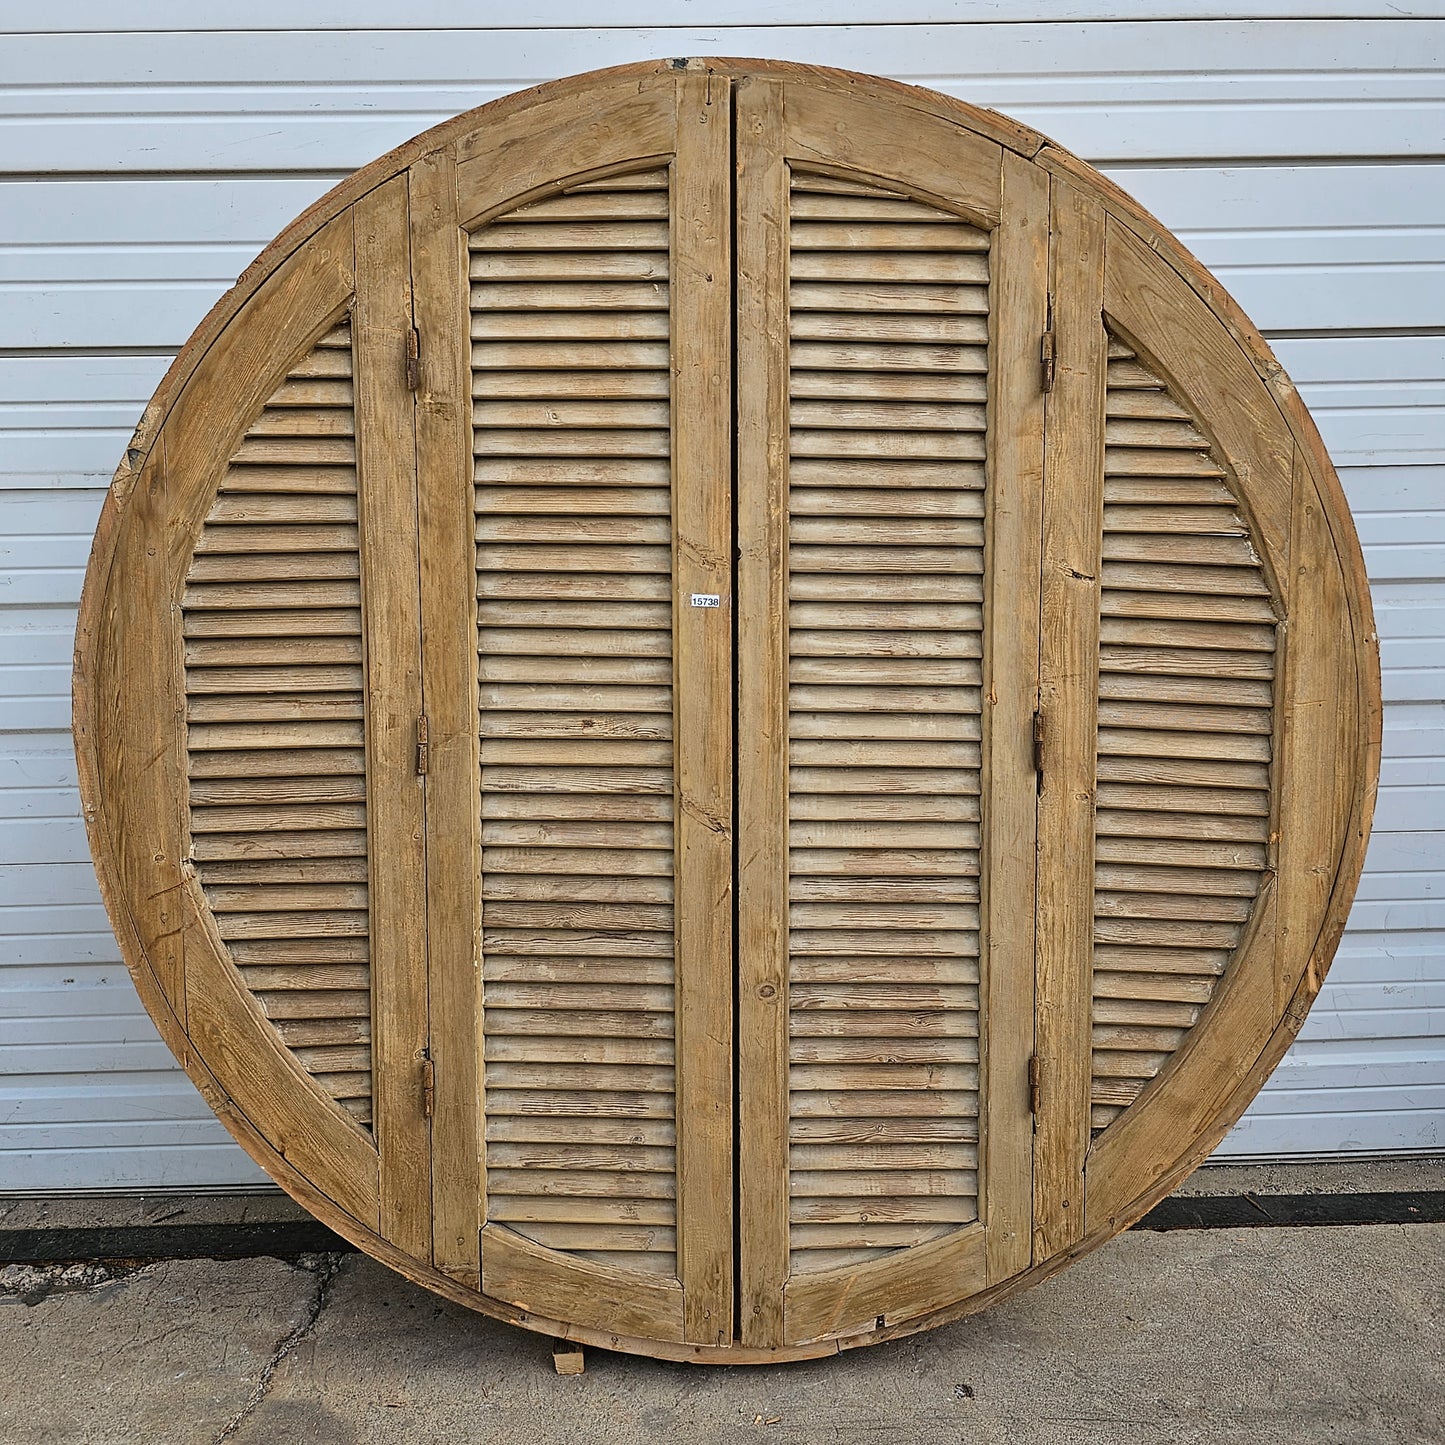 Set of 4 Round Wood Shutters